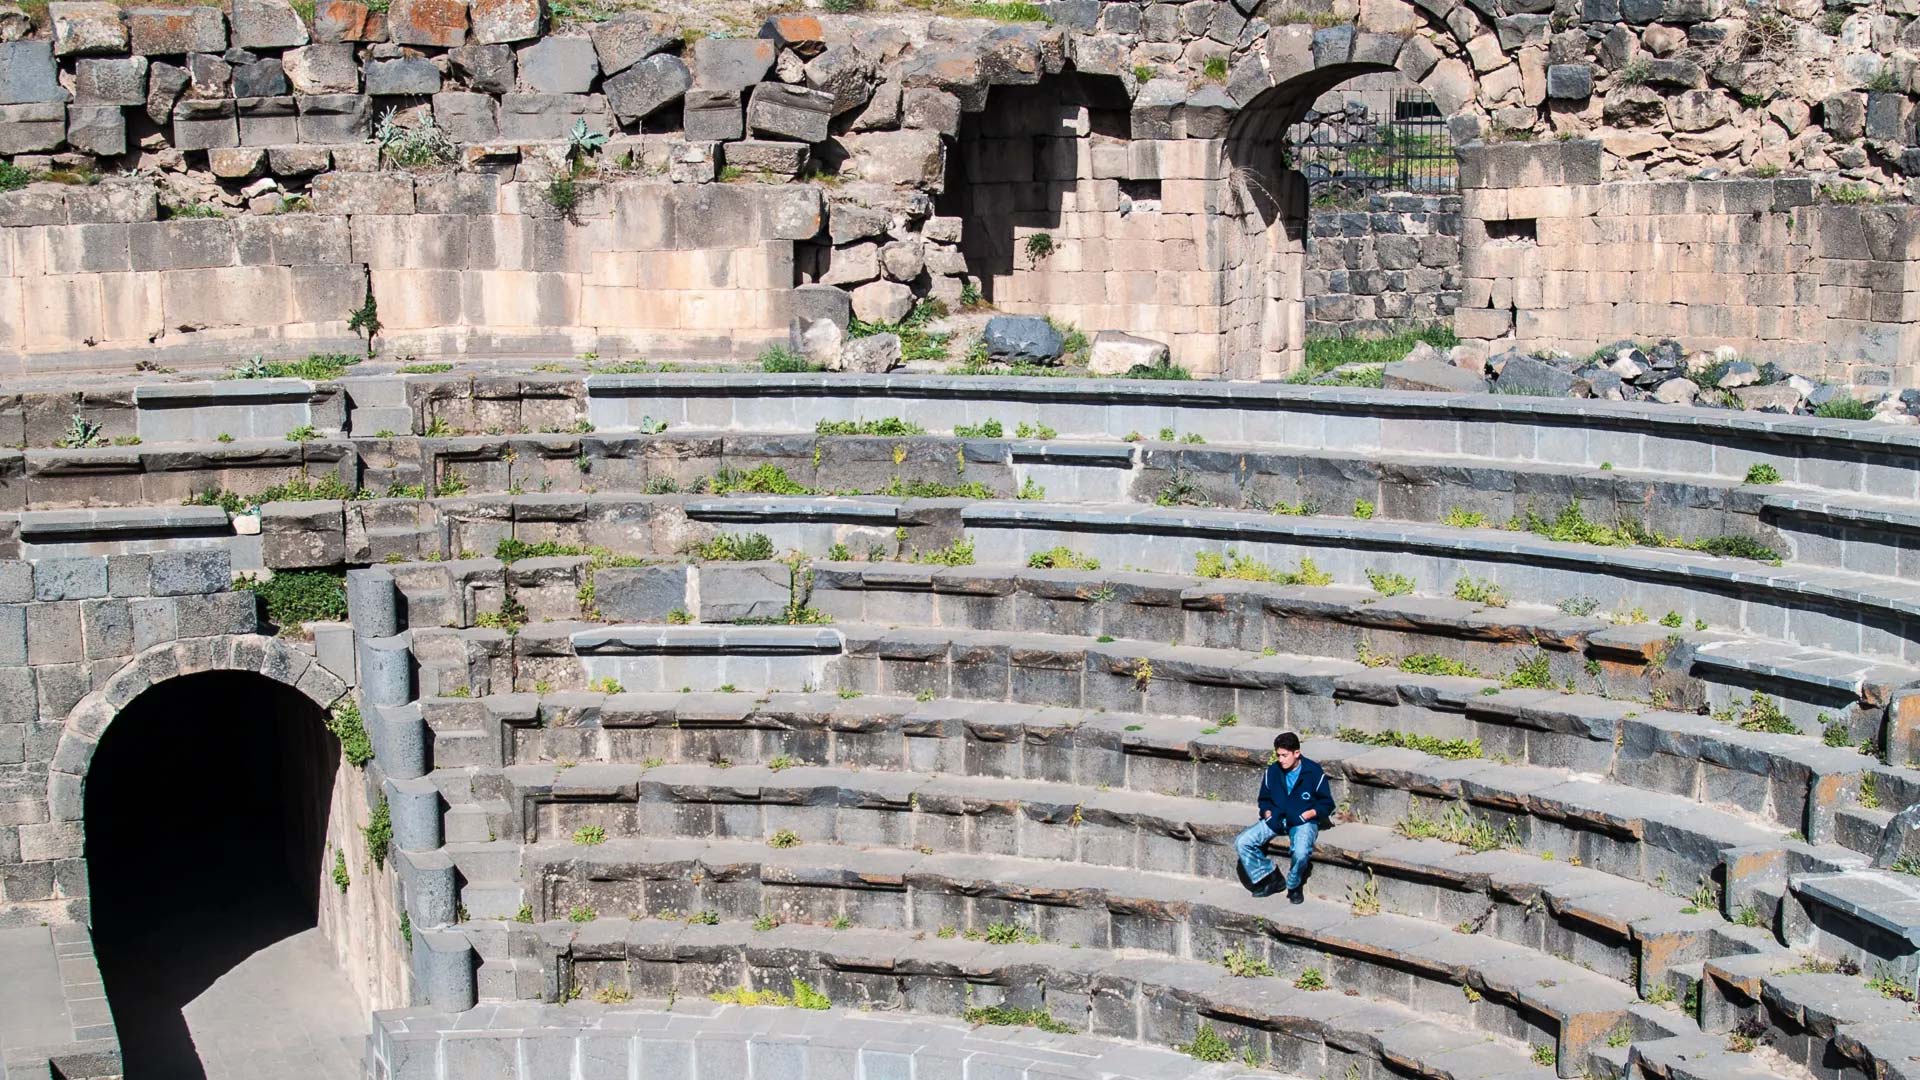 The panoramic photograph immortalizes the Roman theater of Shahba, while a local resident relaxes on the stone seats, adding a touch of contemporary life to the historical setting.